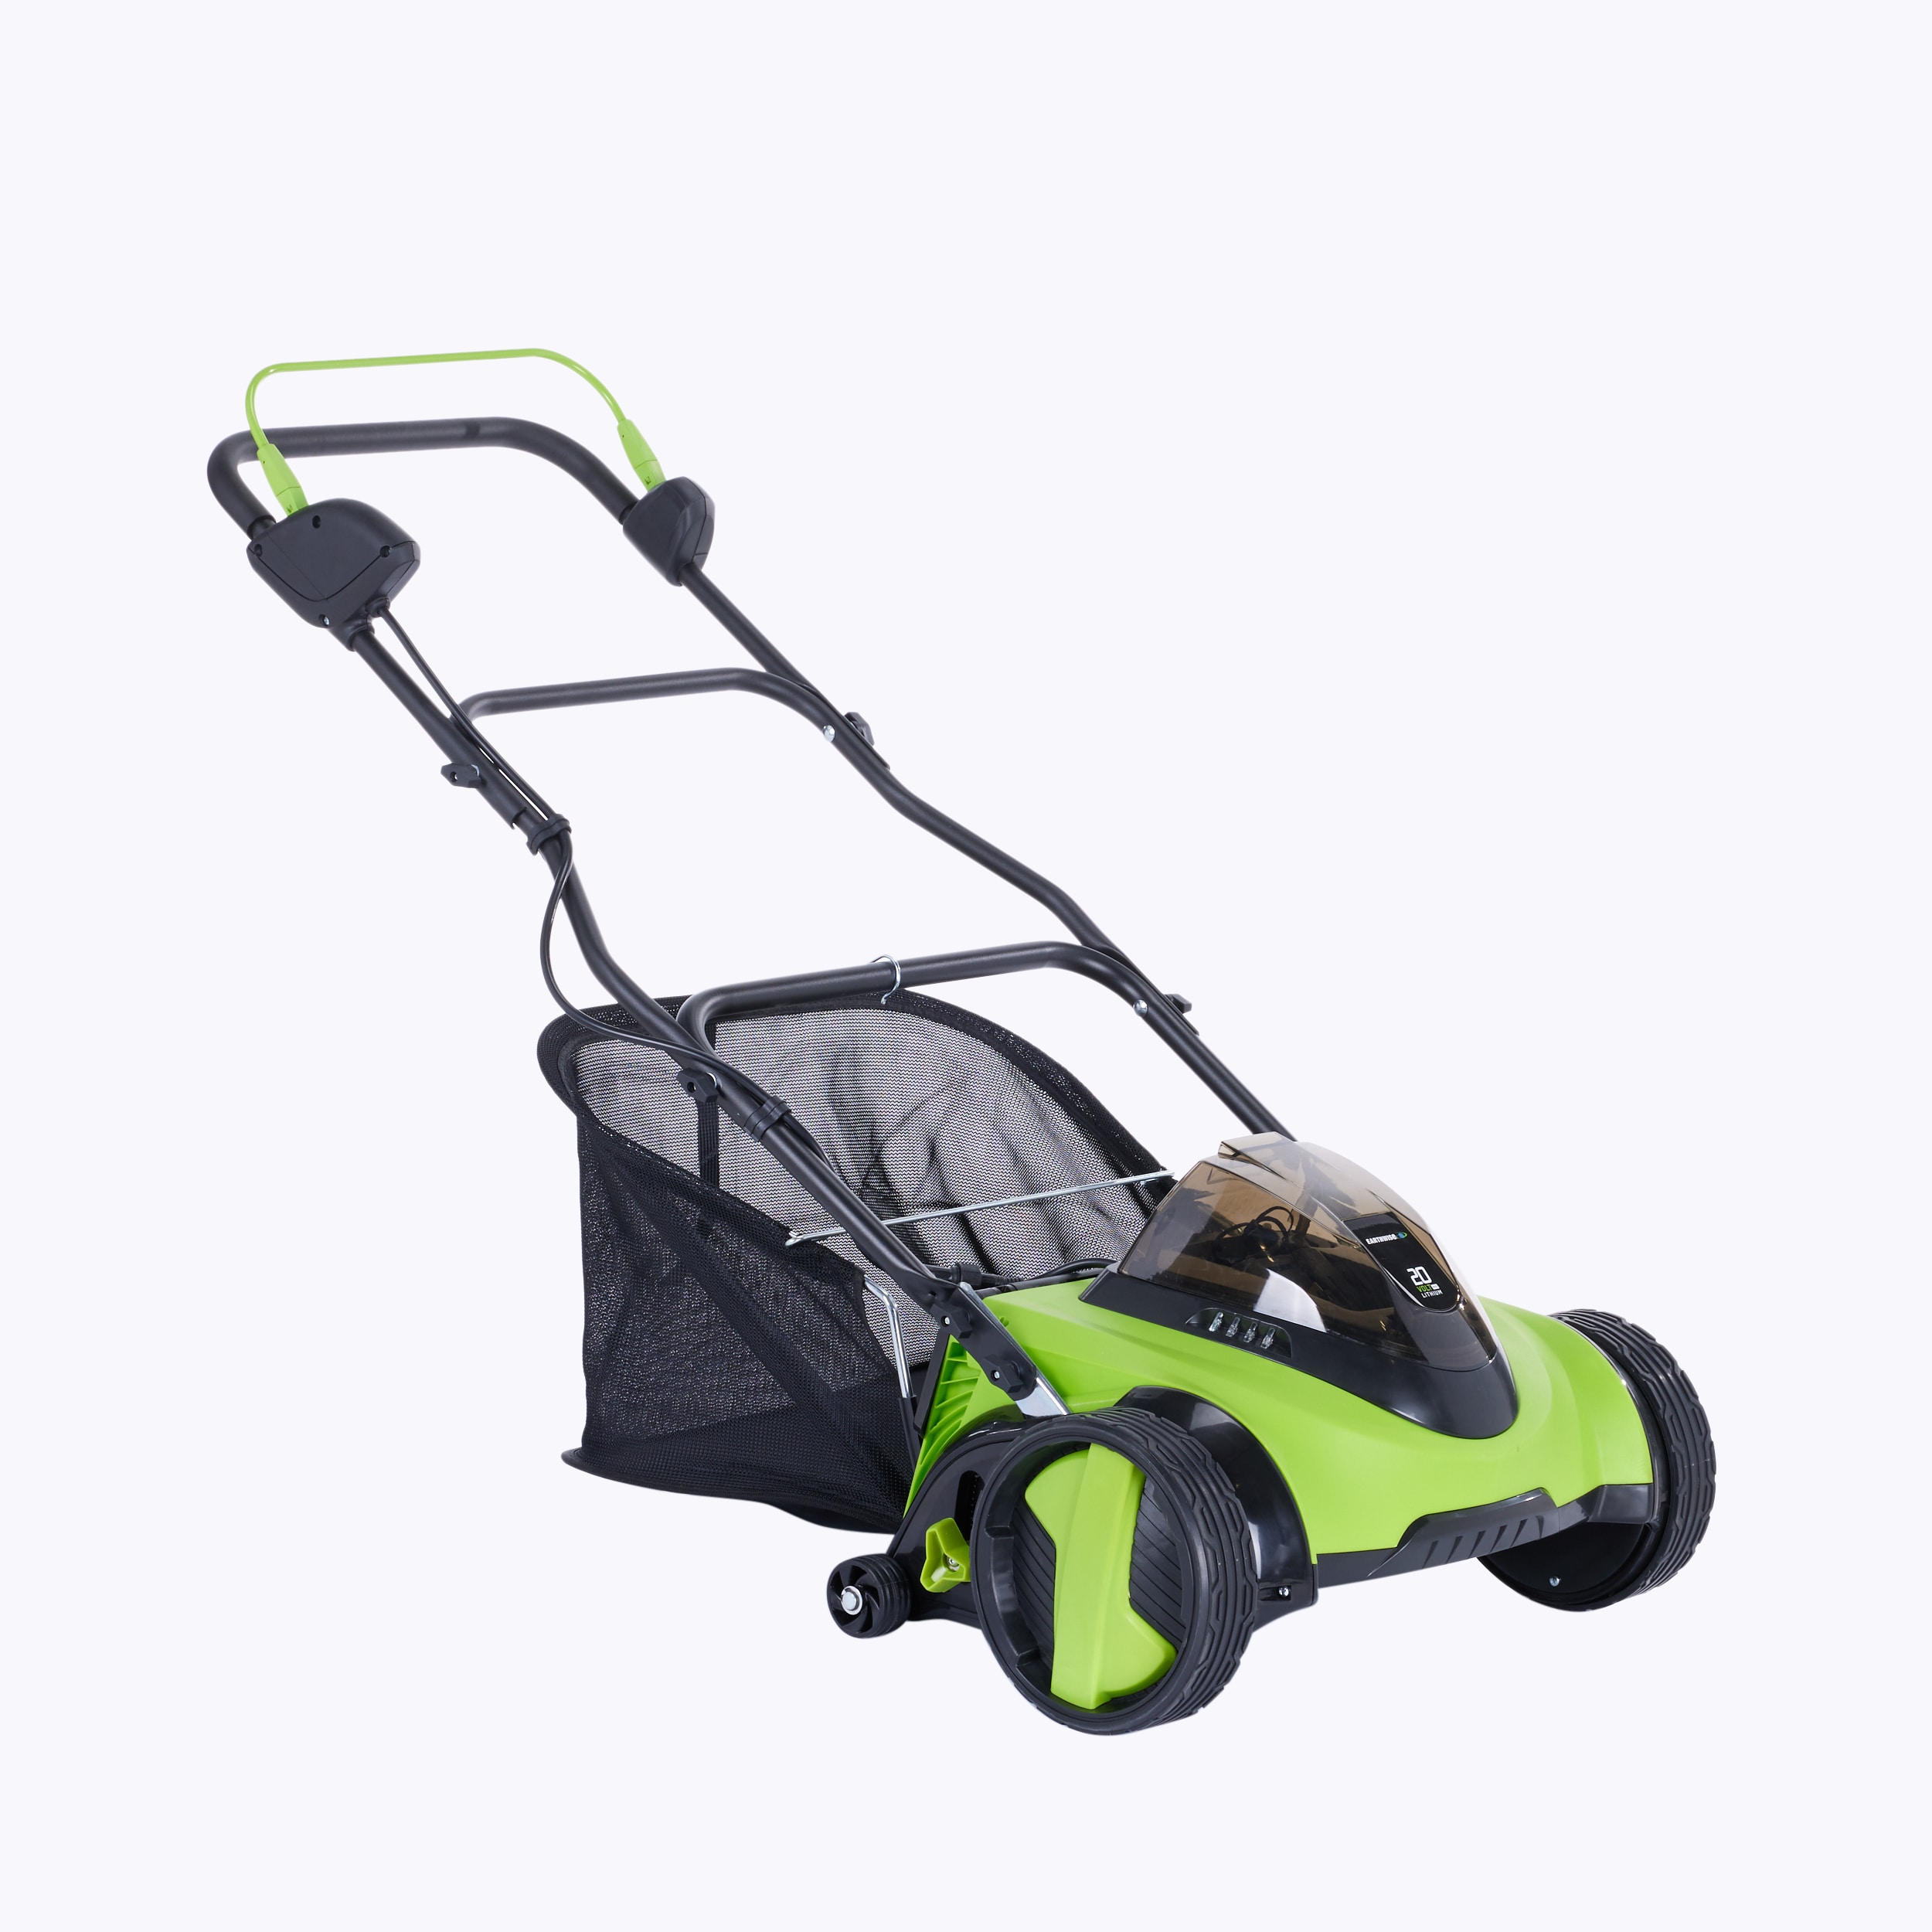 Save on Earthwise reel lawn mowers and electric pressure washers